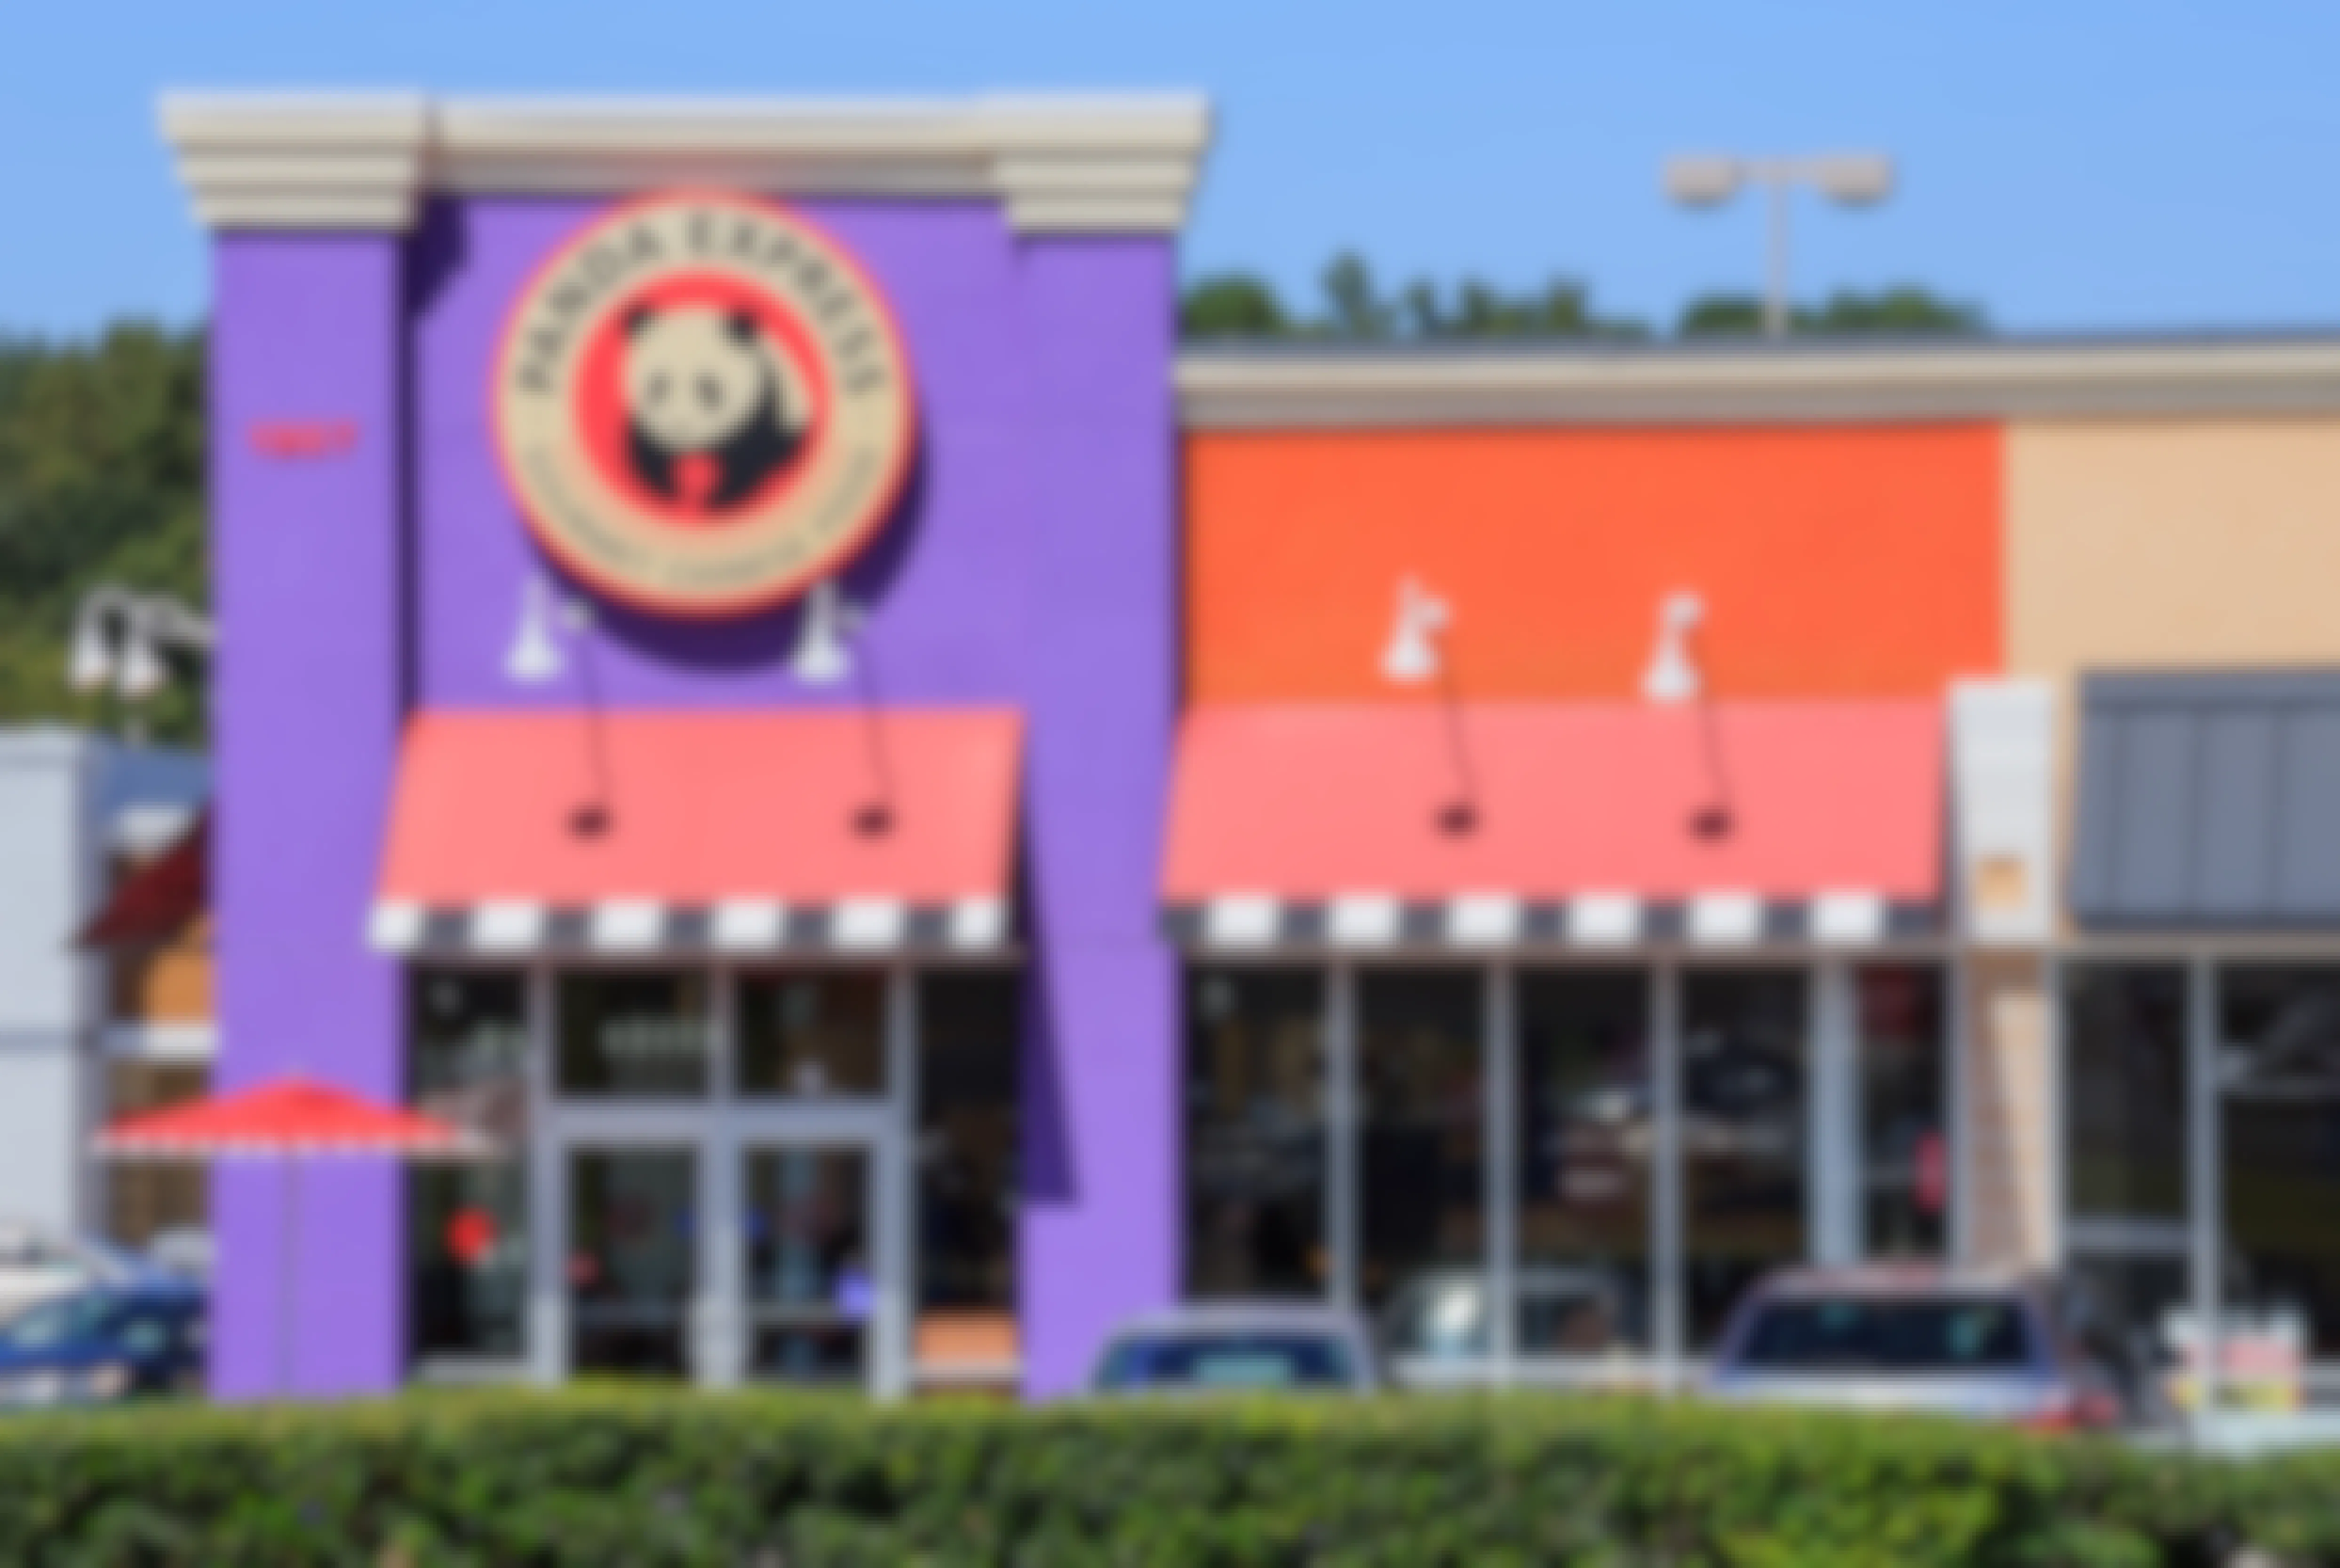 The front of a Panda Express restaurant